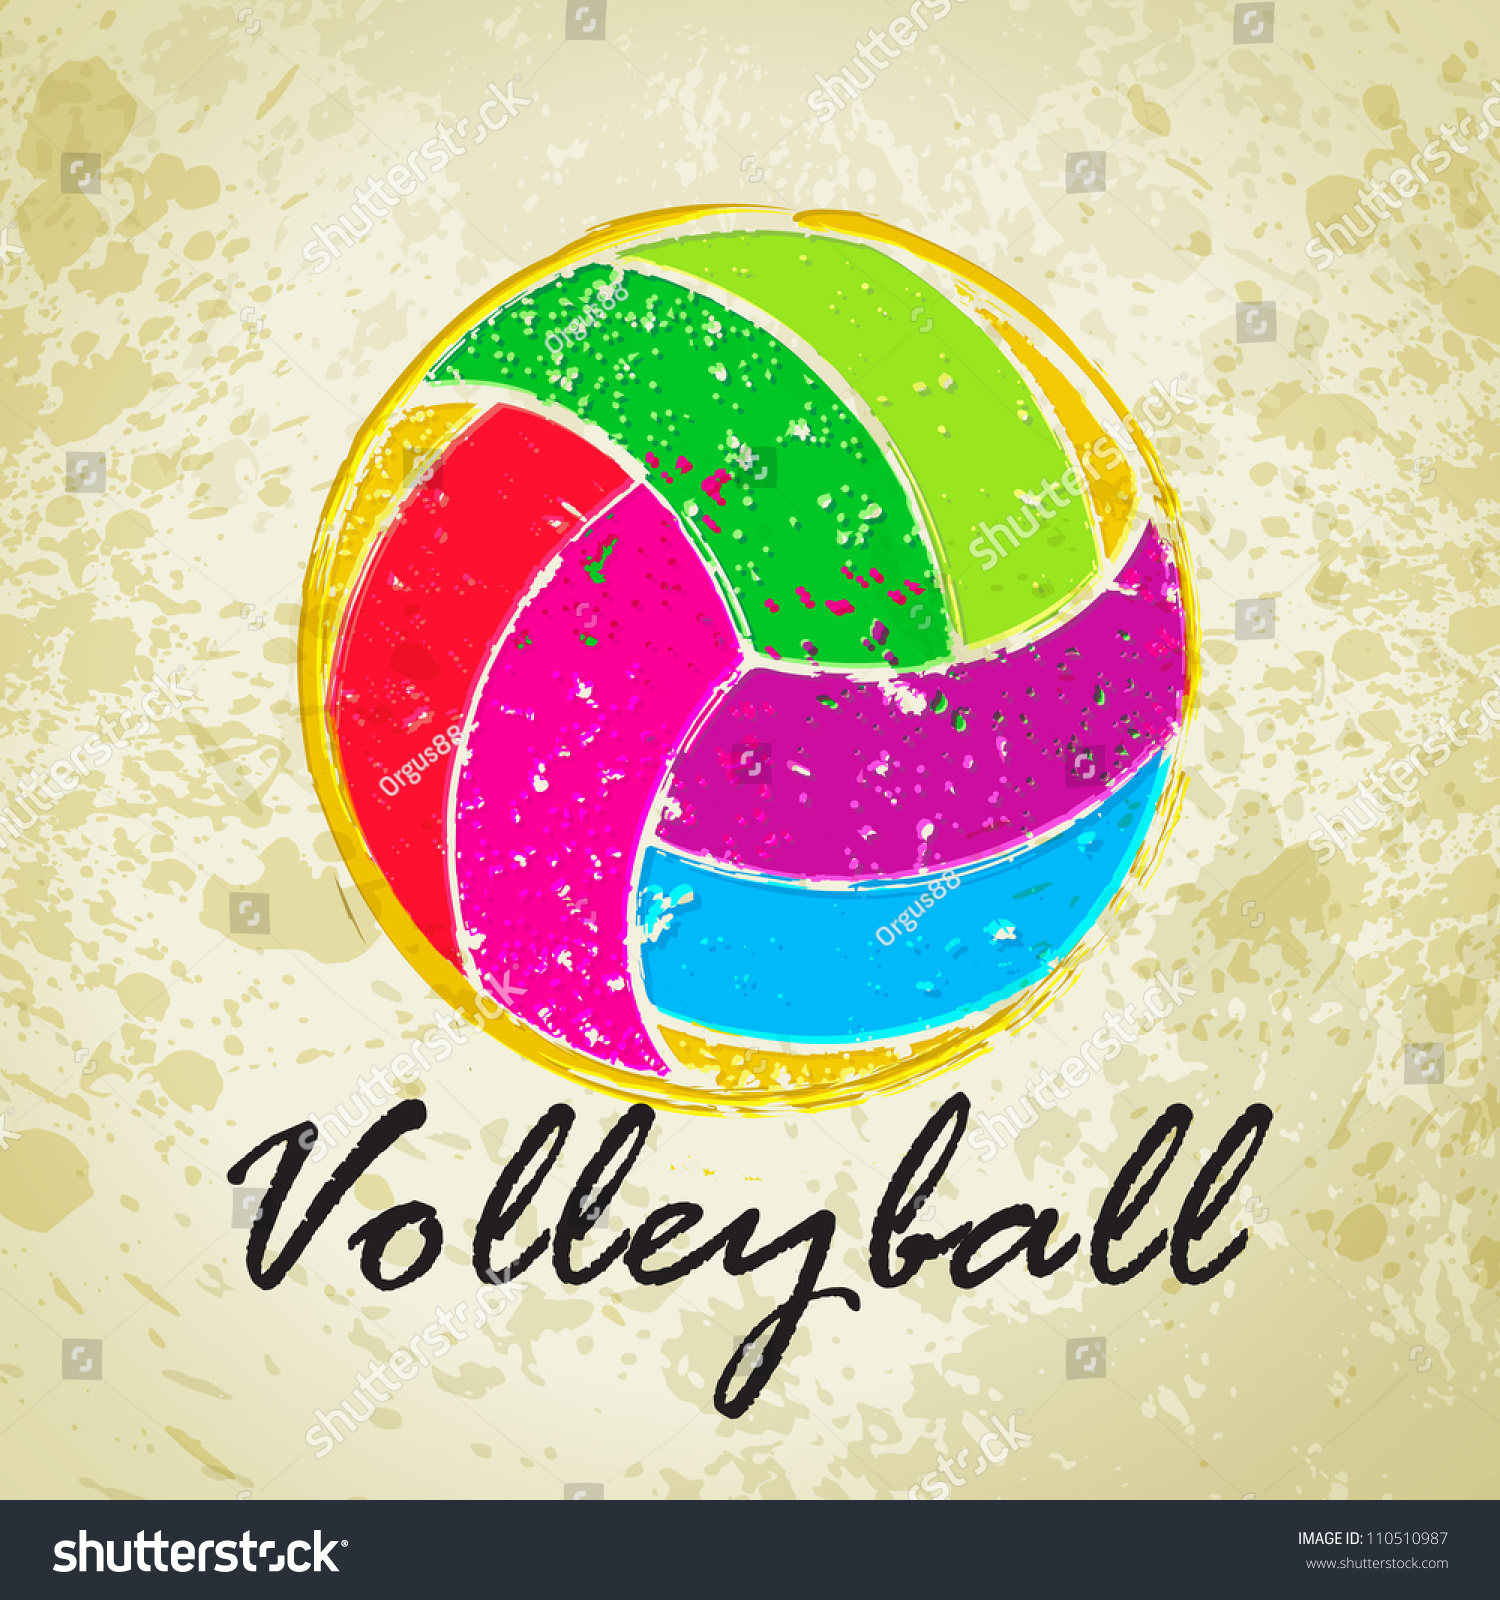 Vector Grunge Volleyball Grunge Backgrounds Stock Vector 110510987 ...